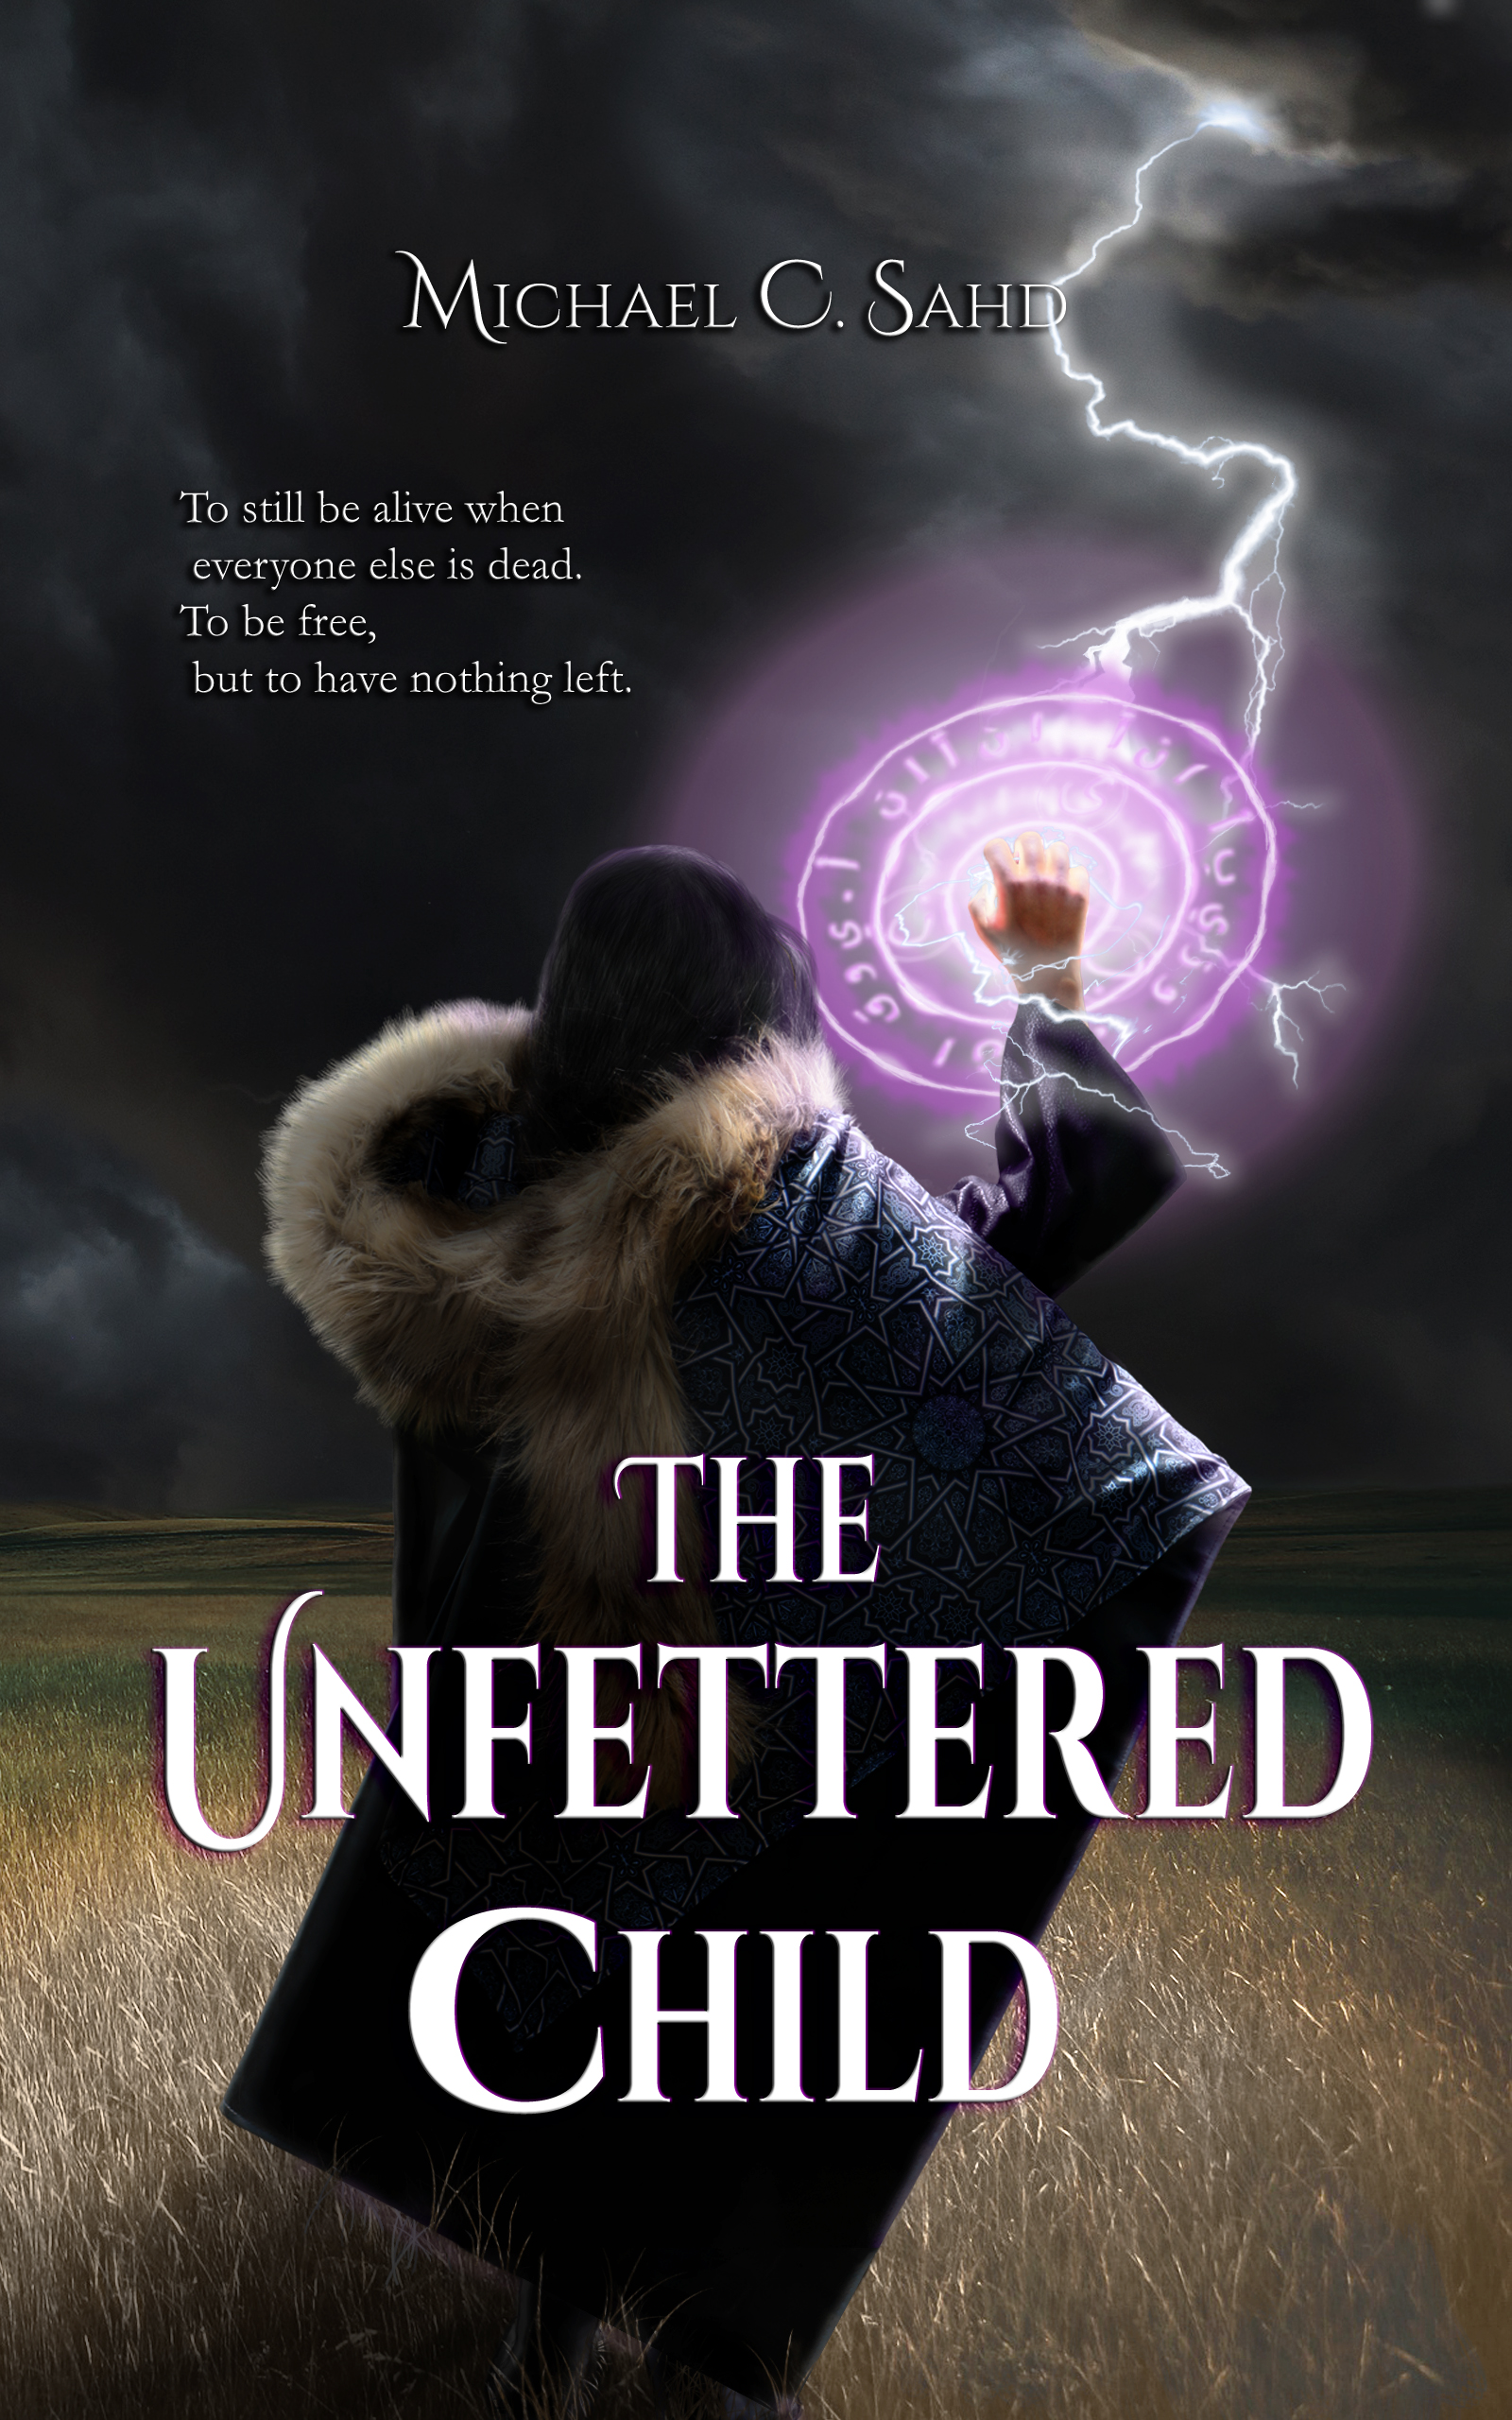 FREE: The Unfettered Child by Michael C. Sahd